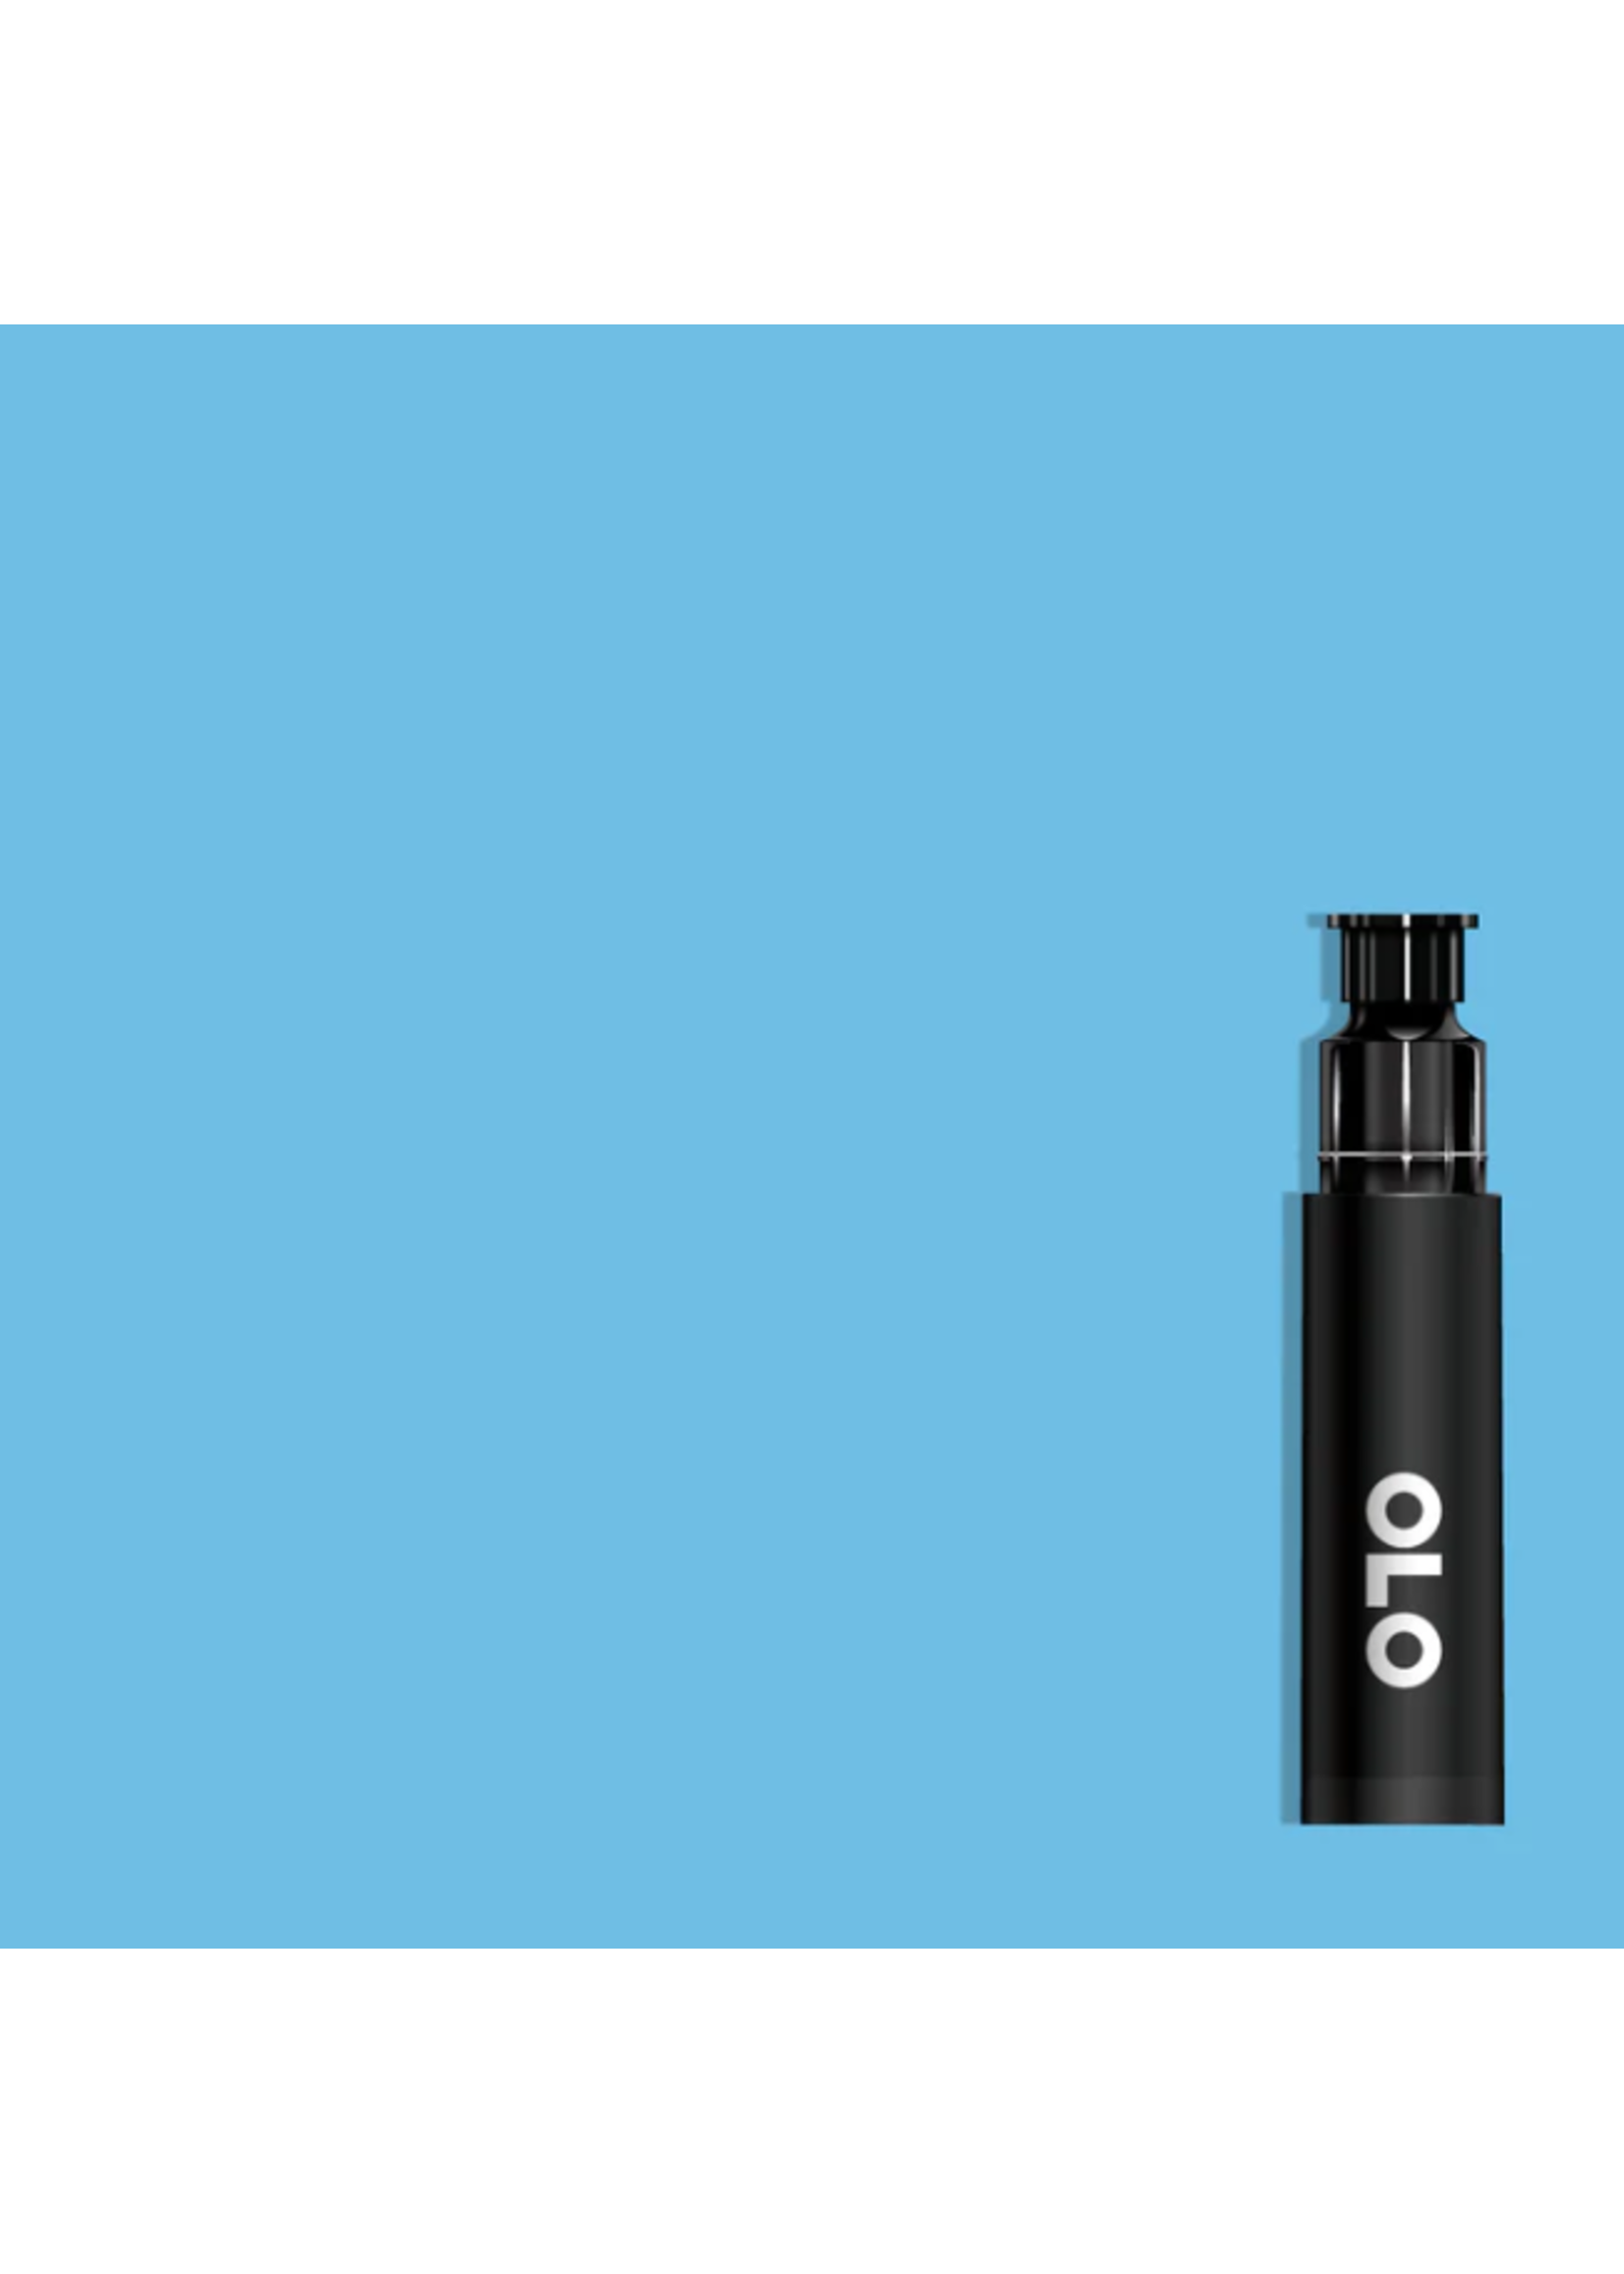 OLO OLO Brush Replacement Cartridge: Sky